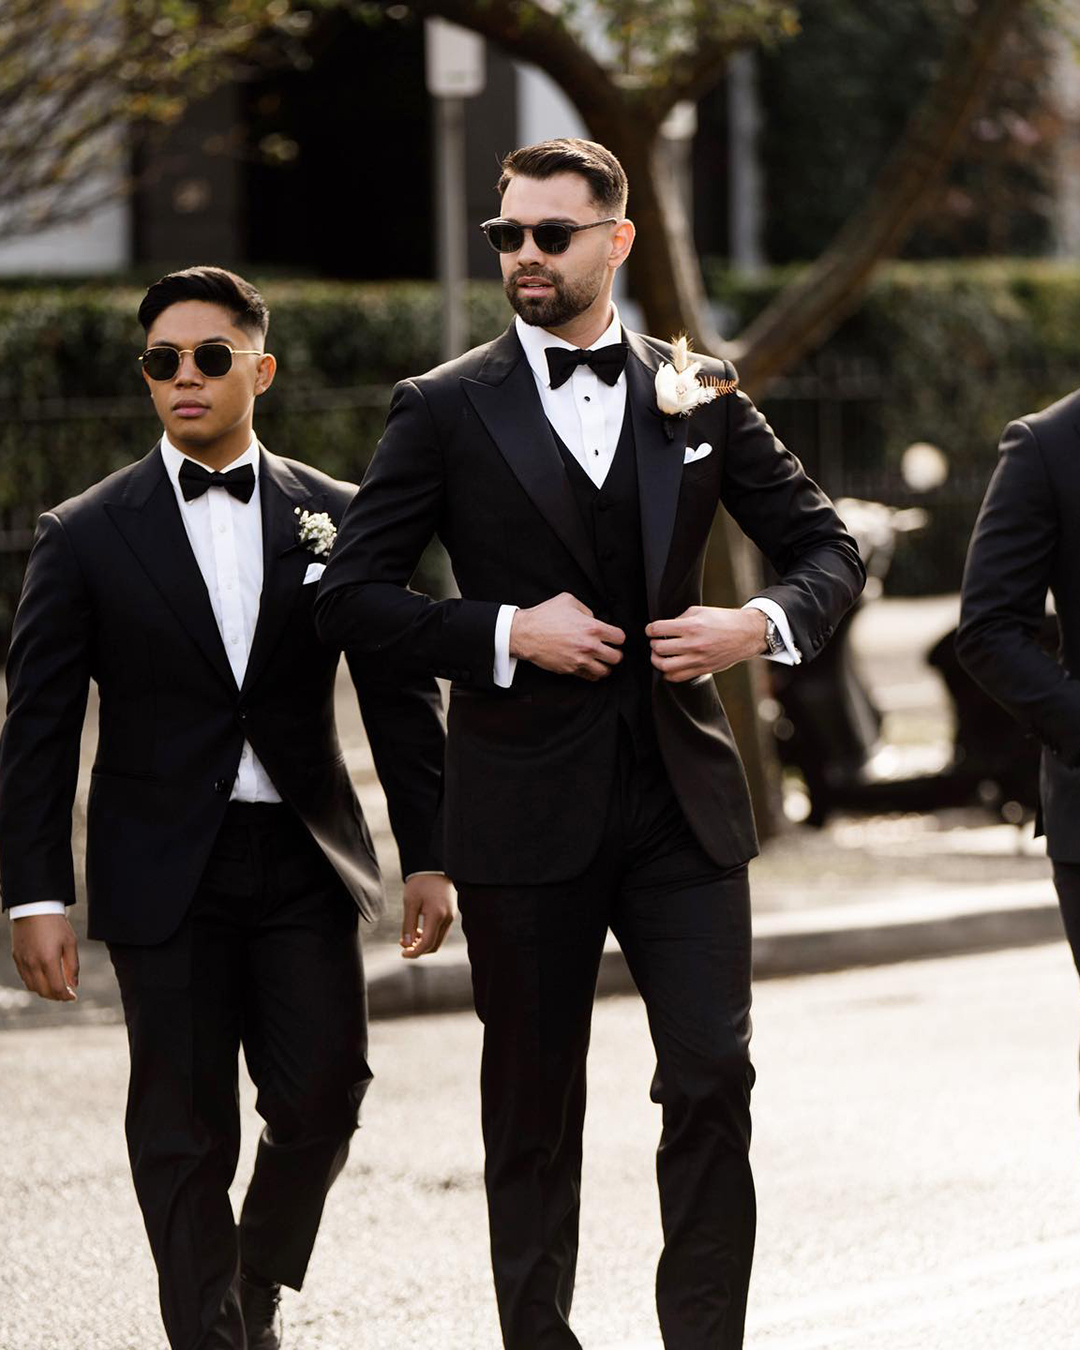 Can You Wear Black Suit To A Wedding?